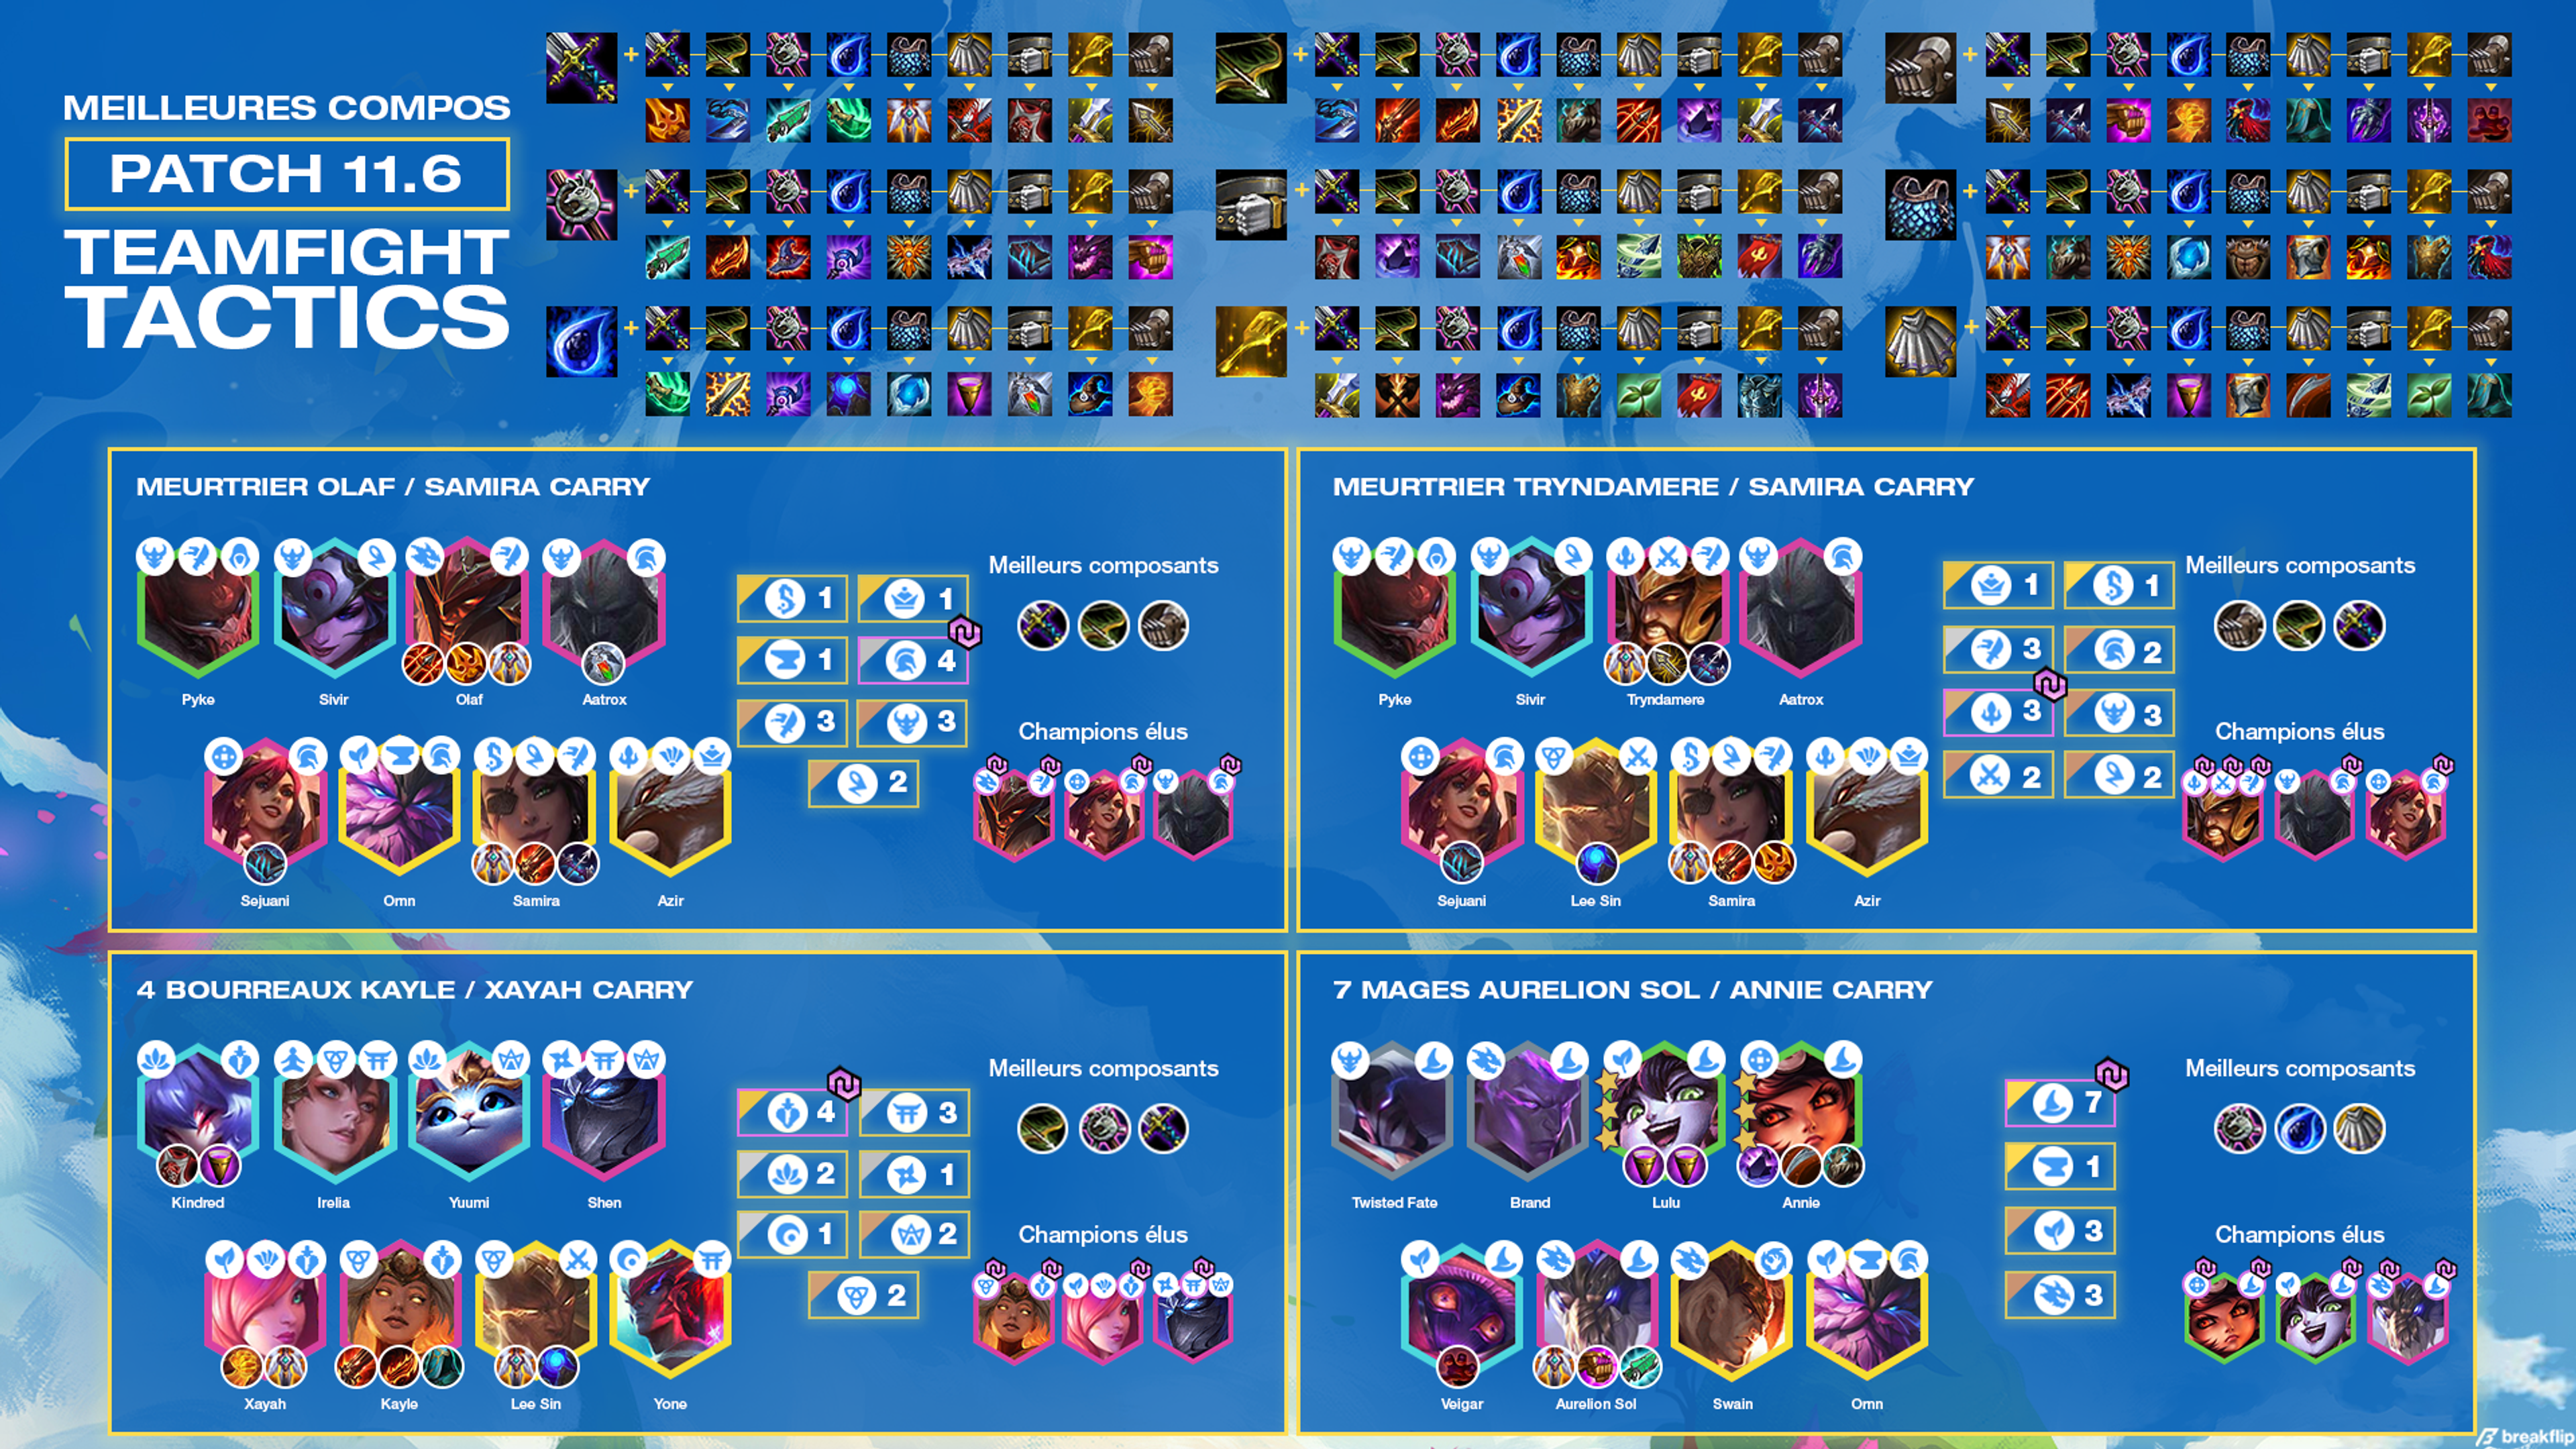 TFT-Cheat-Sheet-Compo-Patch-11.6